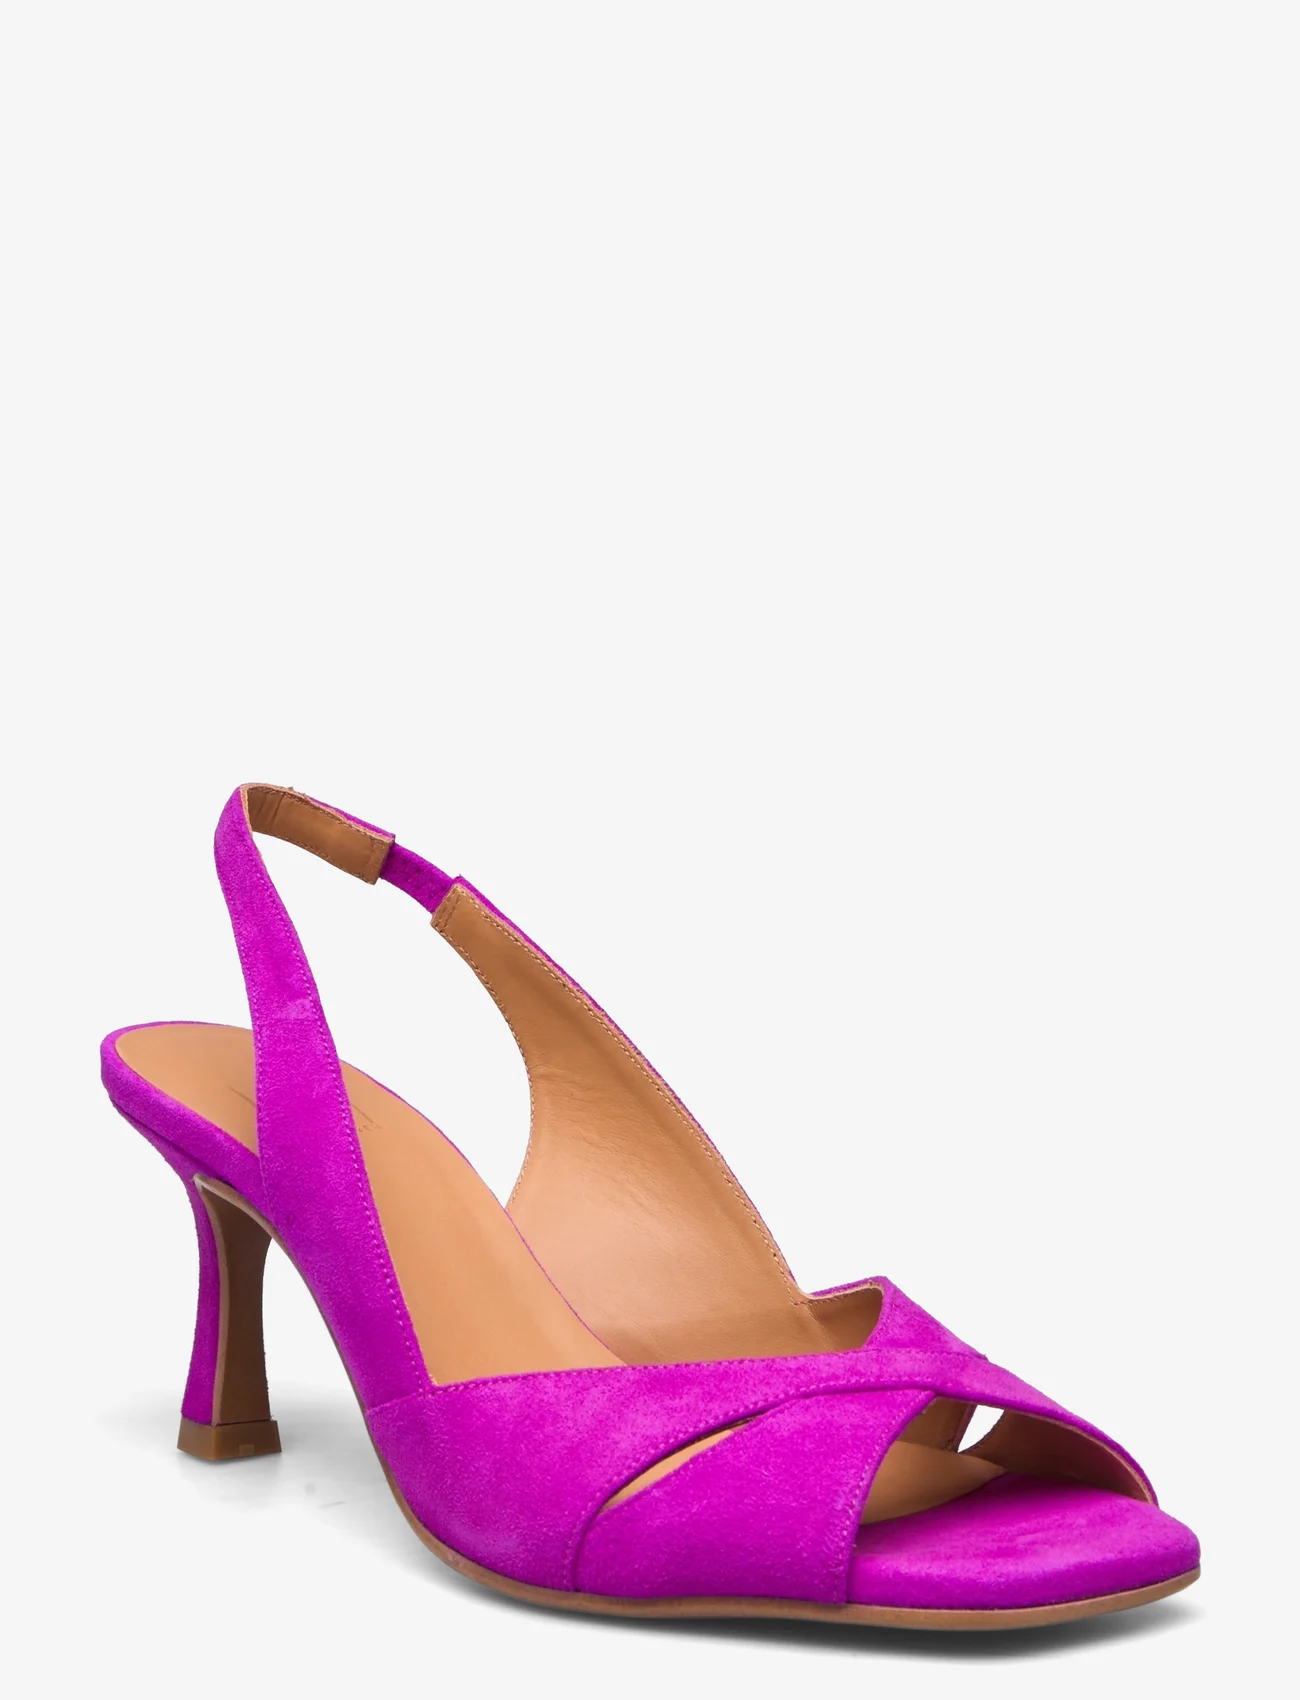 Billi Bi - Sandals - party wear at outlet prices - fuxia neon suede - 0